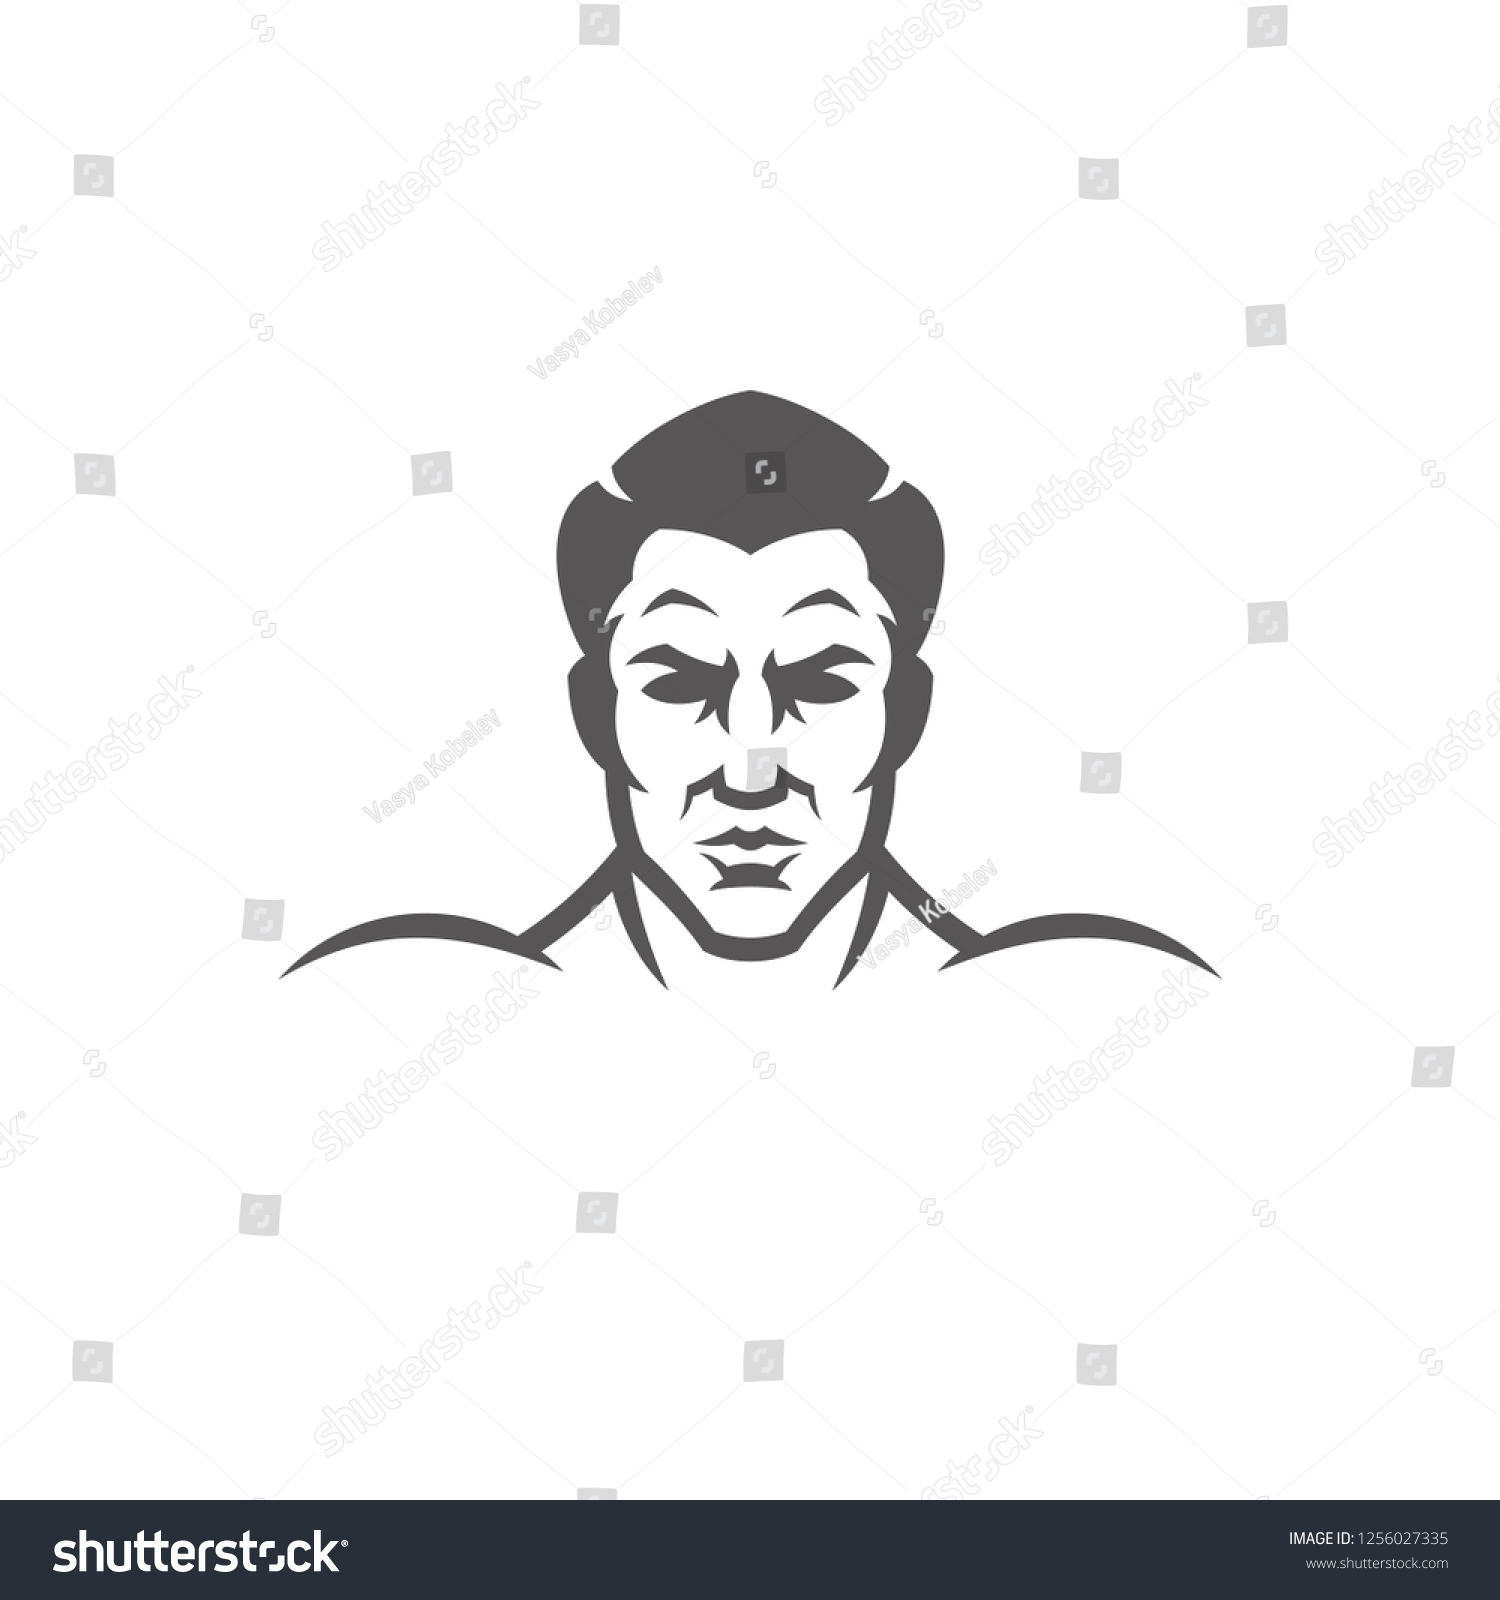 Bodybuilder Man Head Silhouette Isolated On Stock Vector Royalty Free 1256027335 8473